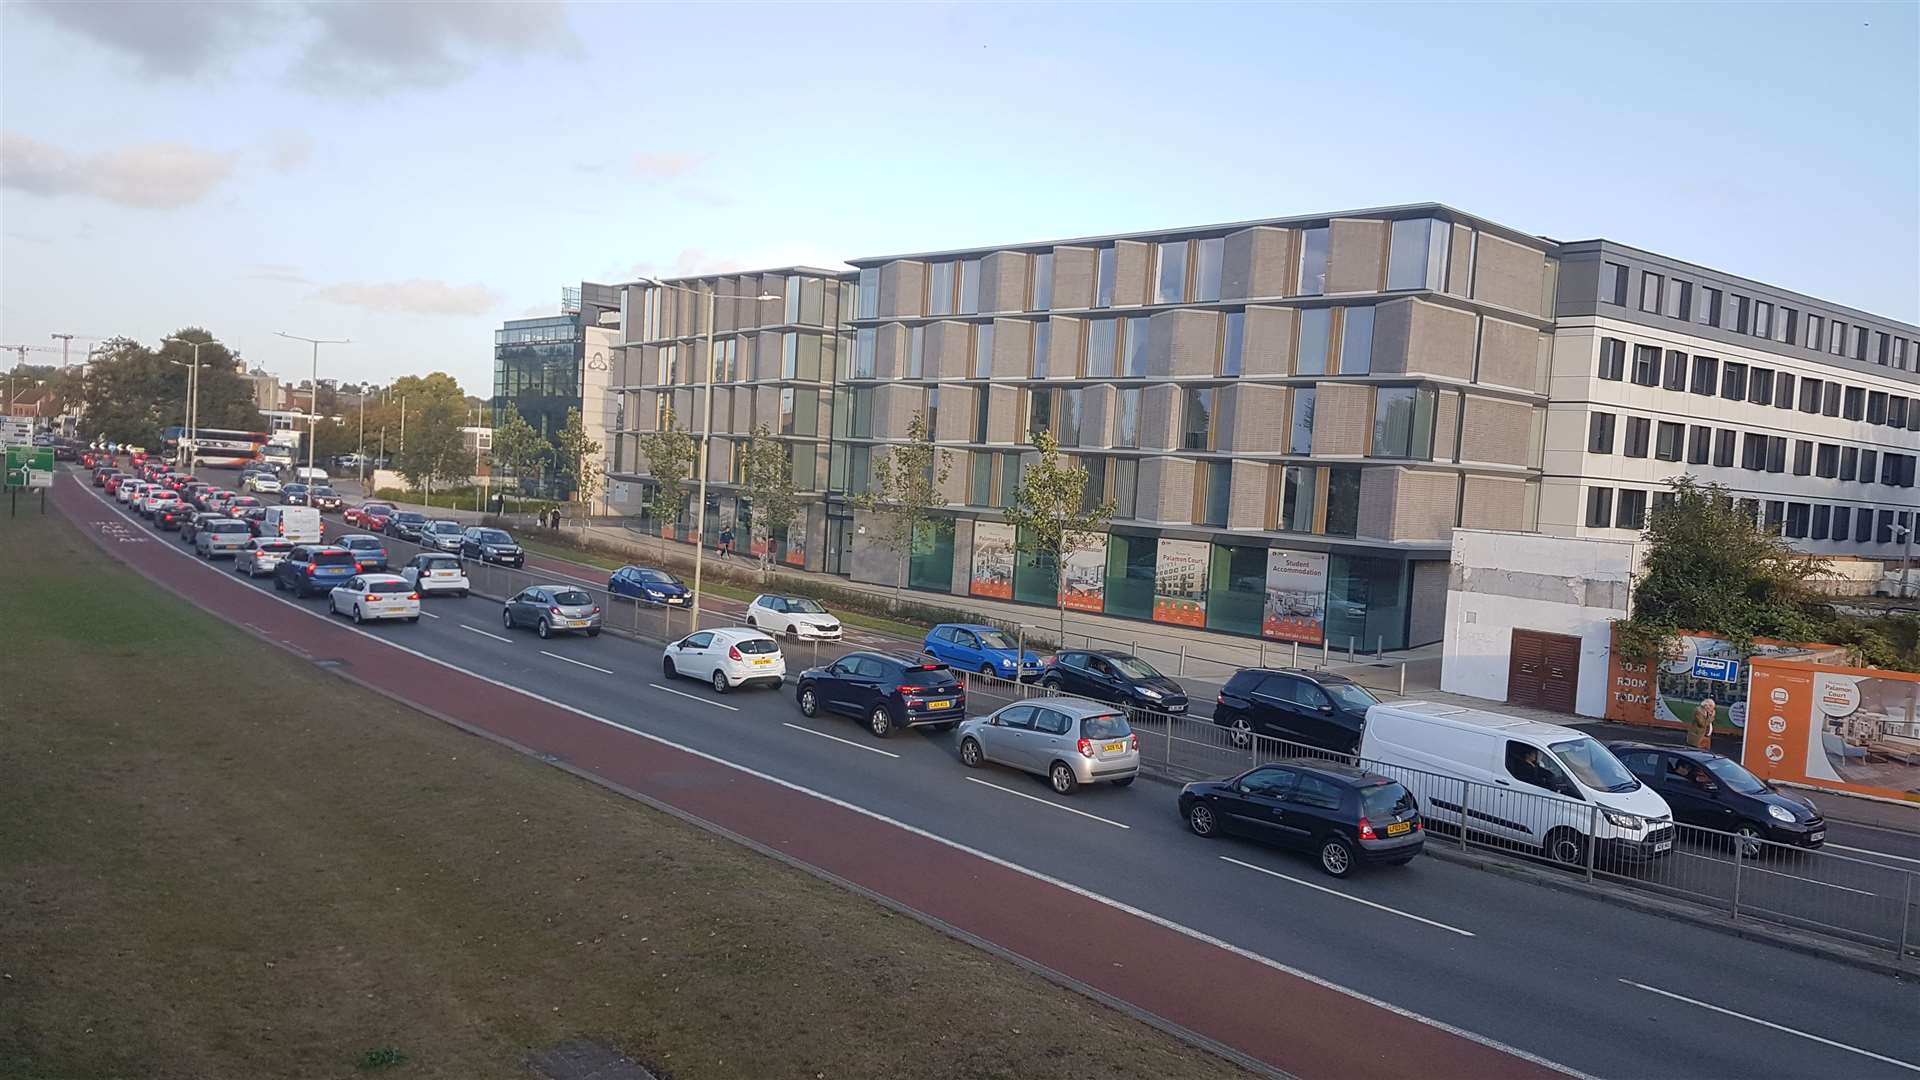 Critics fear the huge development will add too much strain to the city's ring-road